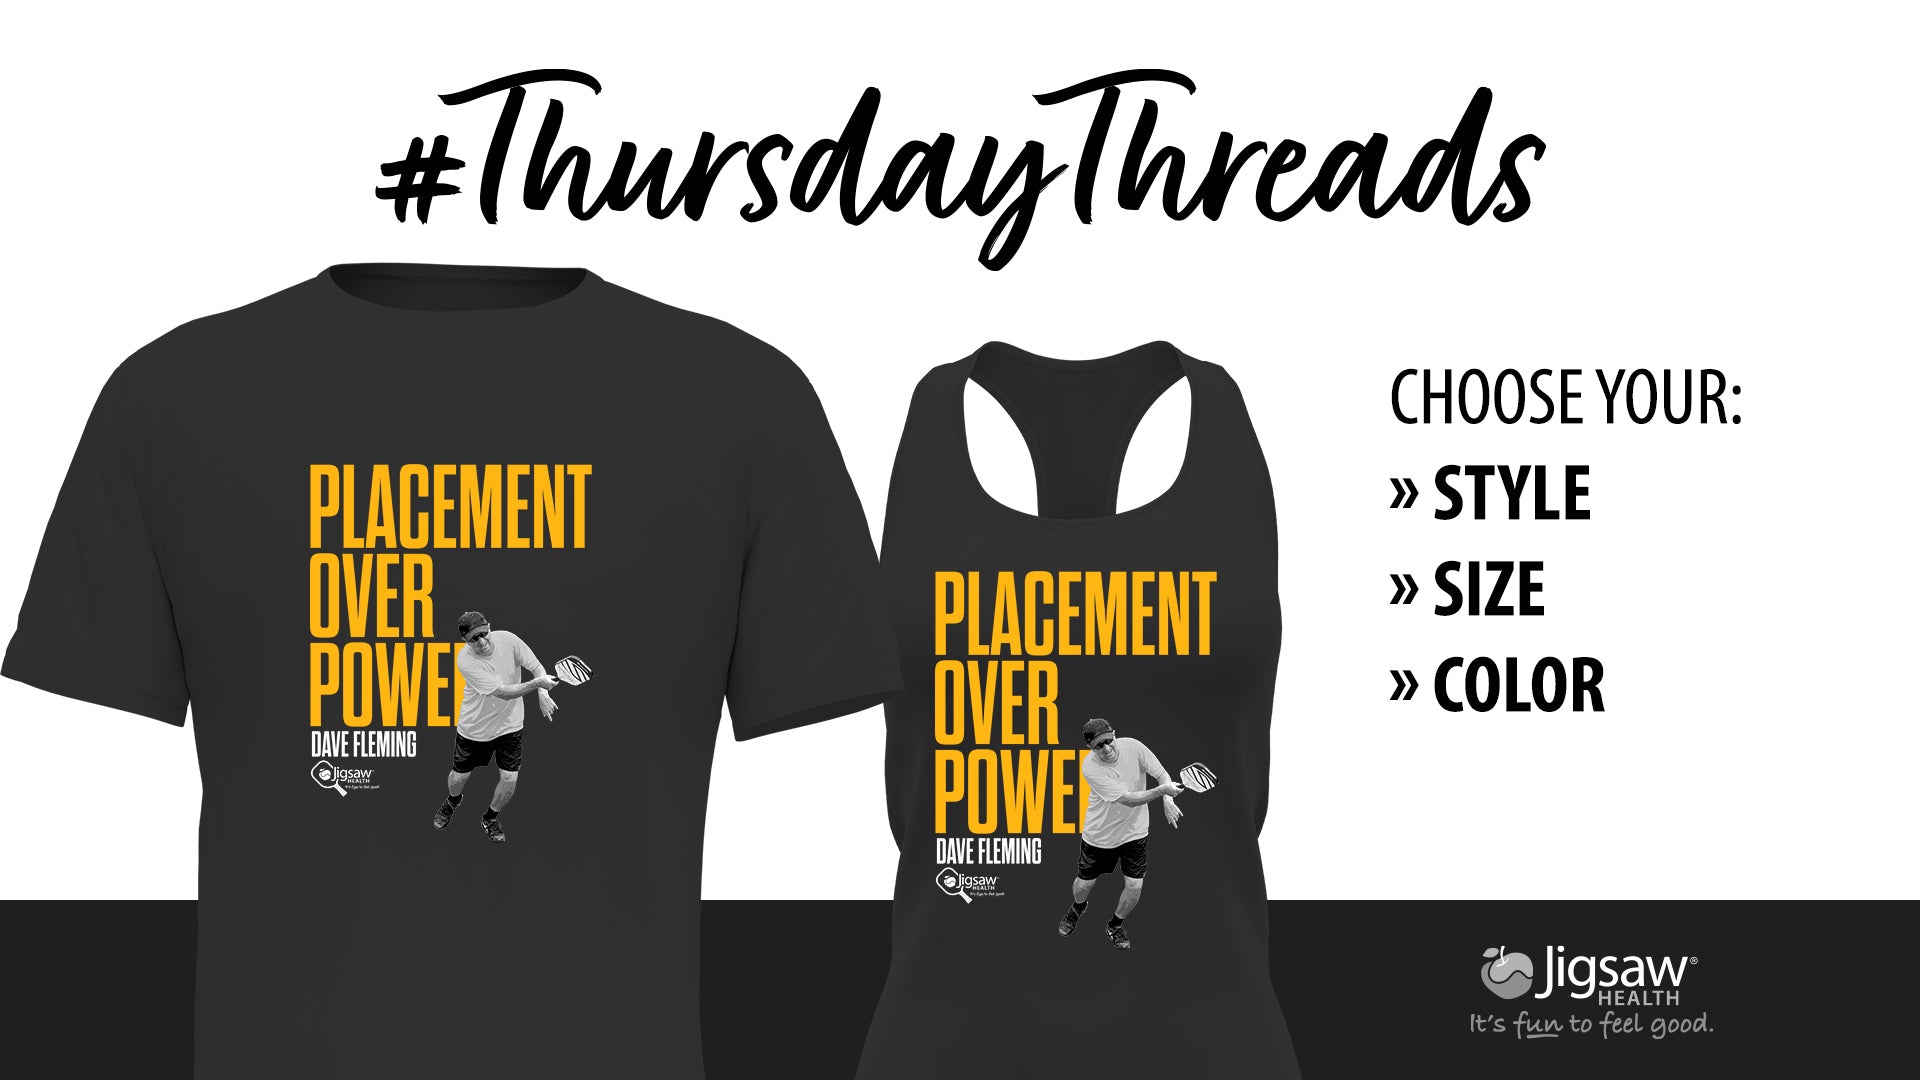 Placement Over Power - Dave Fleming #ThursdayThreads